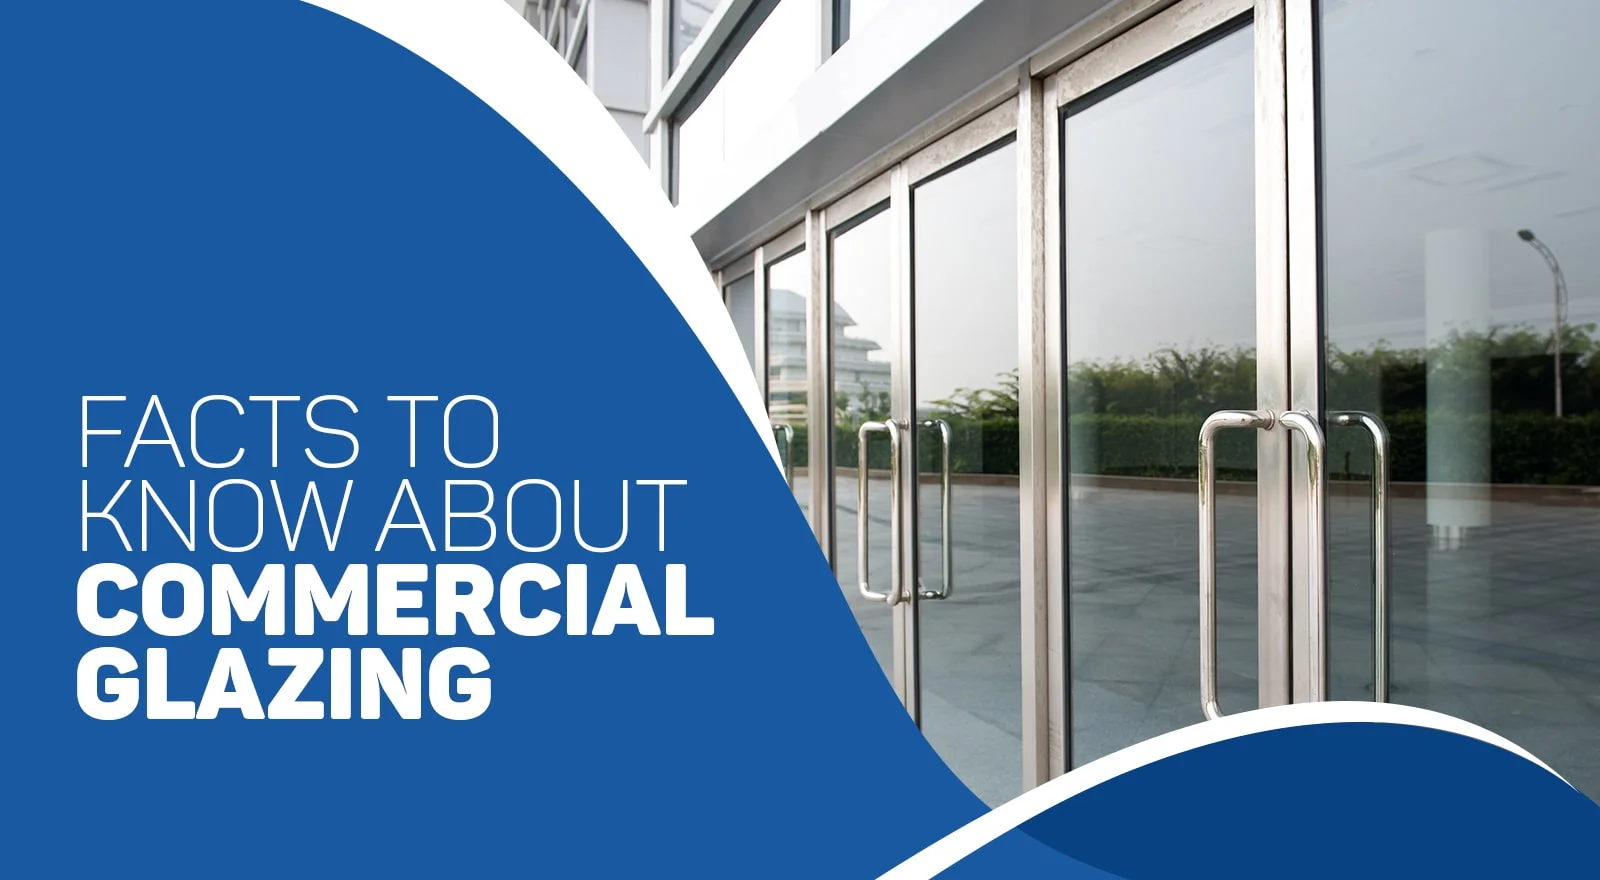 Facts to Know About Commercial Glazing